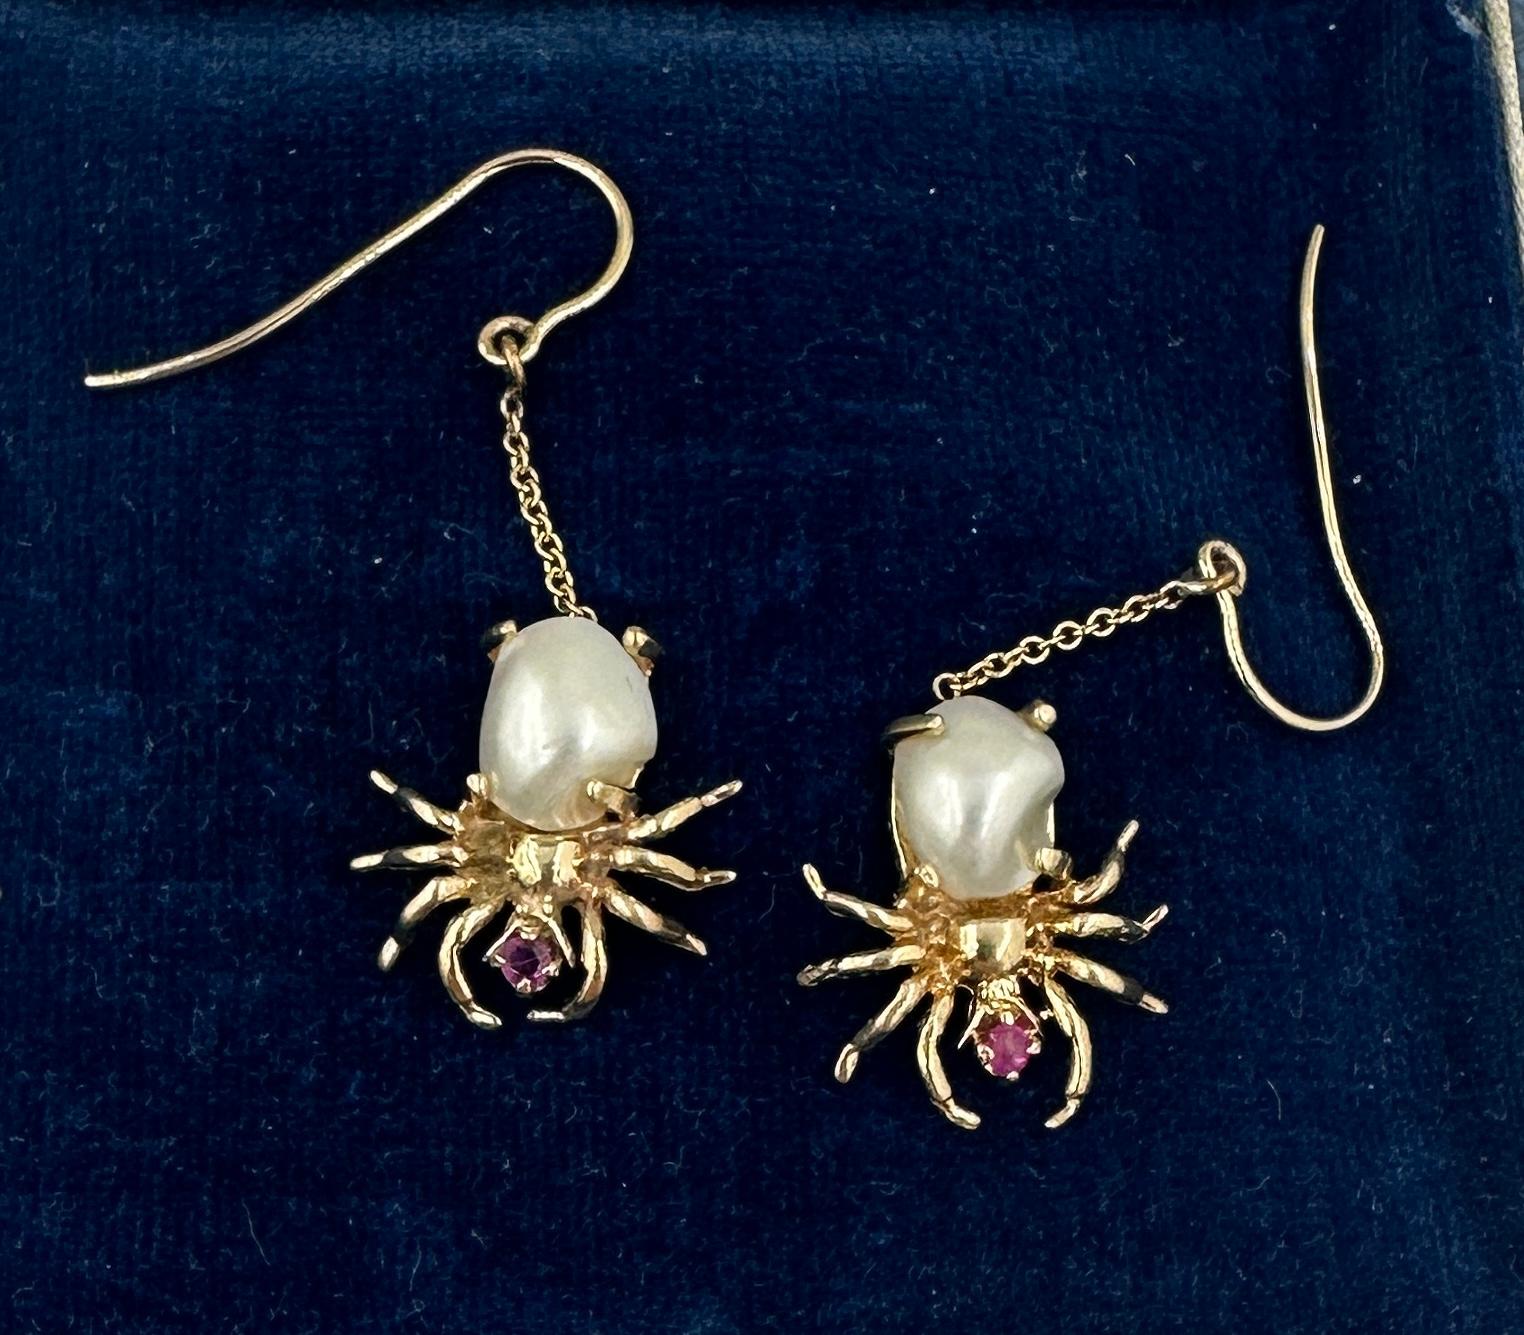 Spider Earrings Pearl Ruby Insect Bug Dangle Drop Earrings Antique Gold In Excellent Condition For Sale In New York, NY